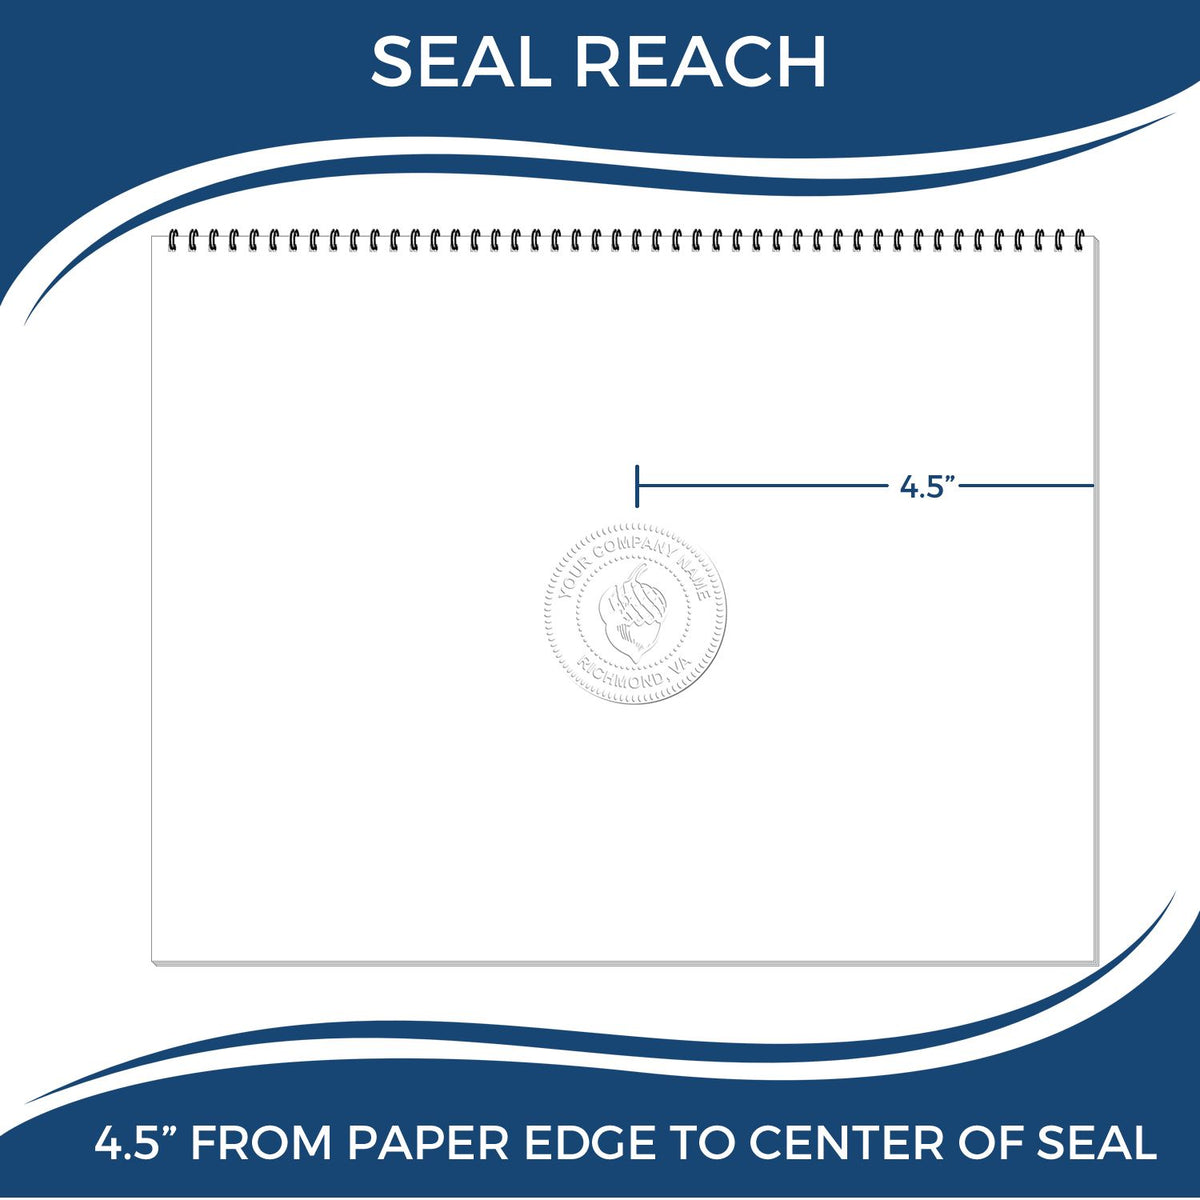 An infographic showing the seal reach which is represented by a ruler and a miniature seal image of the Extended Long Reach Iowa Surveyor Embosser